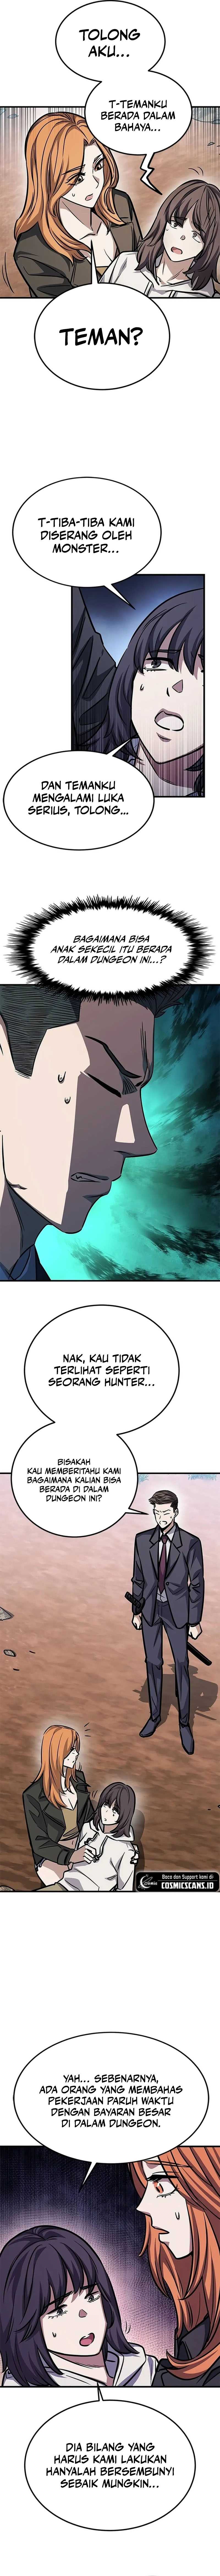 The Legendary Hunter Becomes Young Again Chapter 6